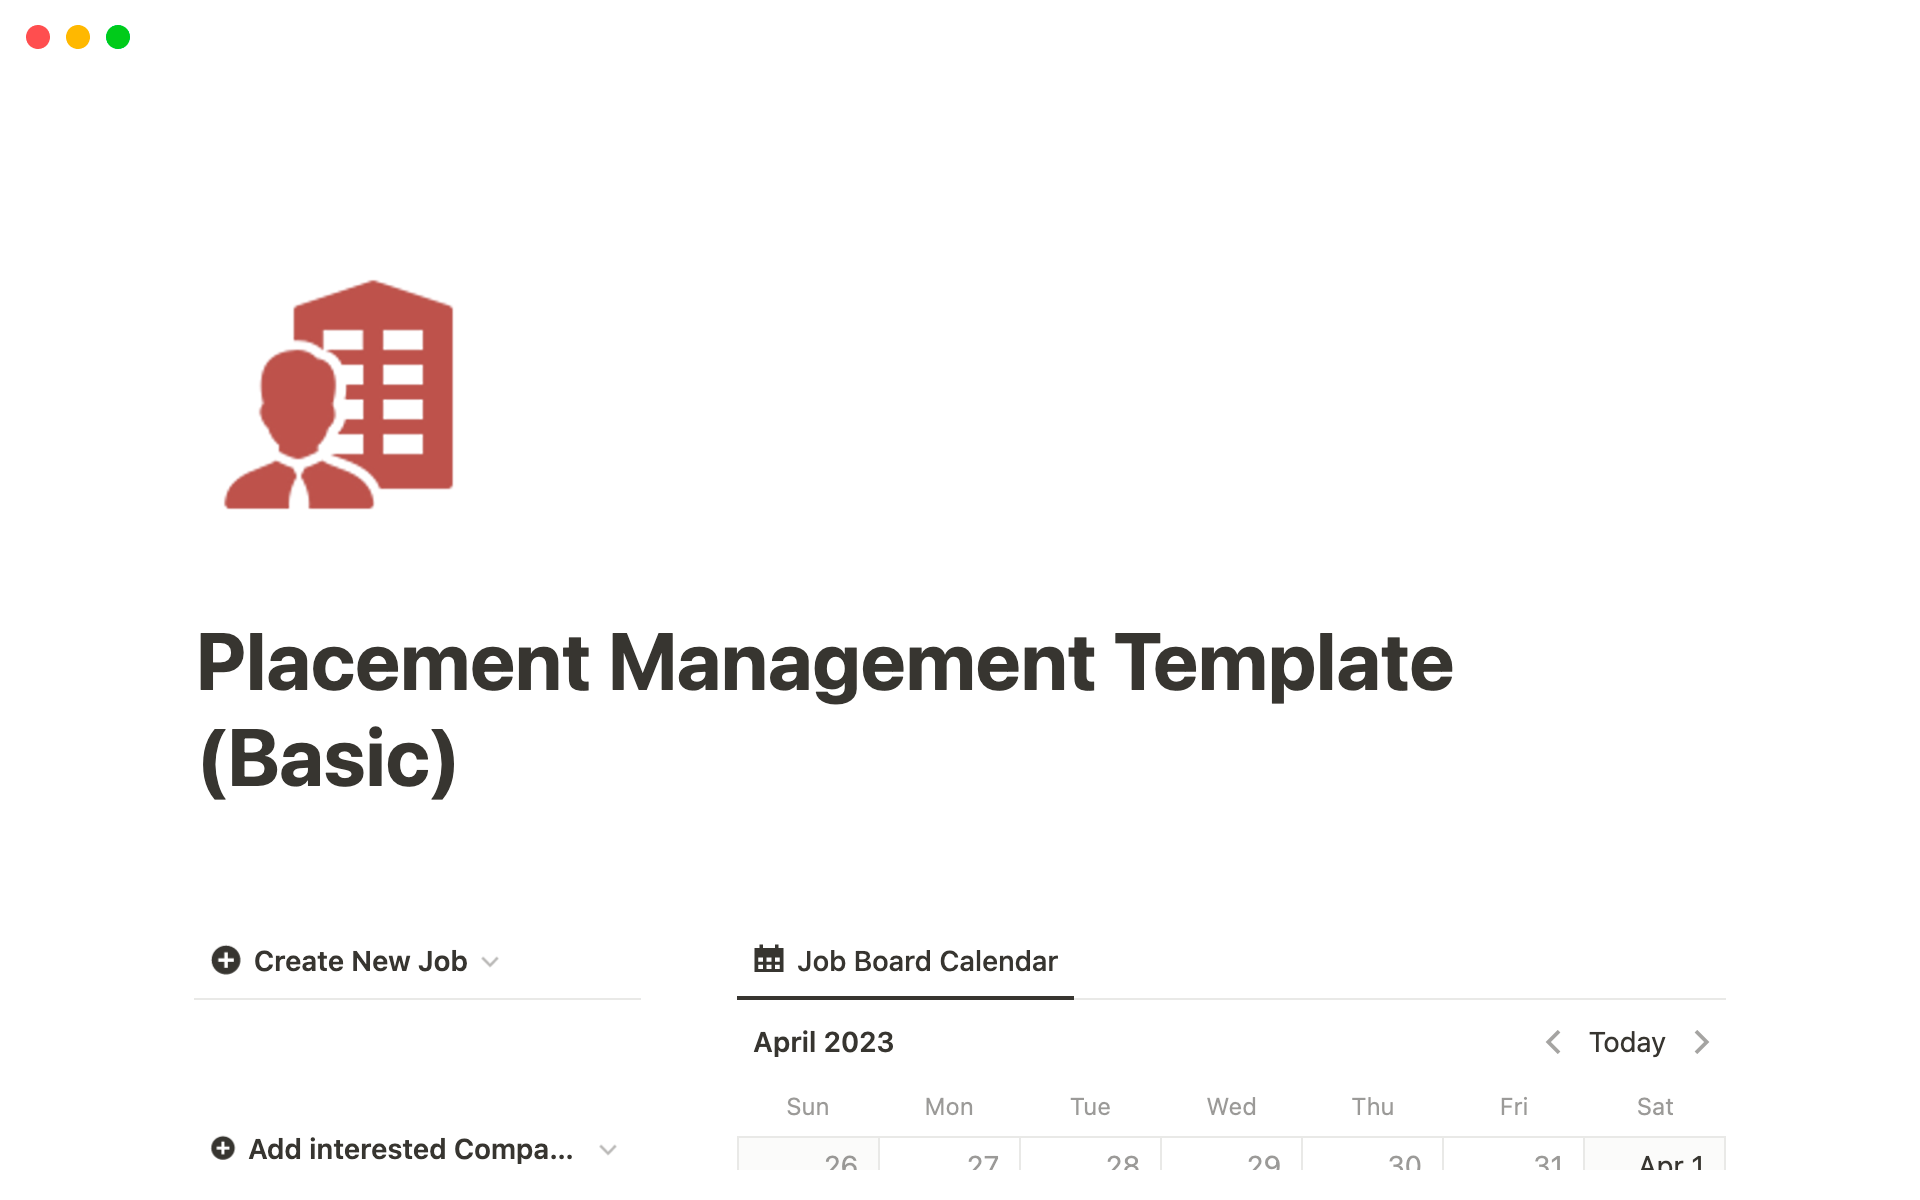 An organizational tool designed to help students manage job applications, interviews, and company research in one centralized location, facilitating a clear overview of the entire placement process.